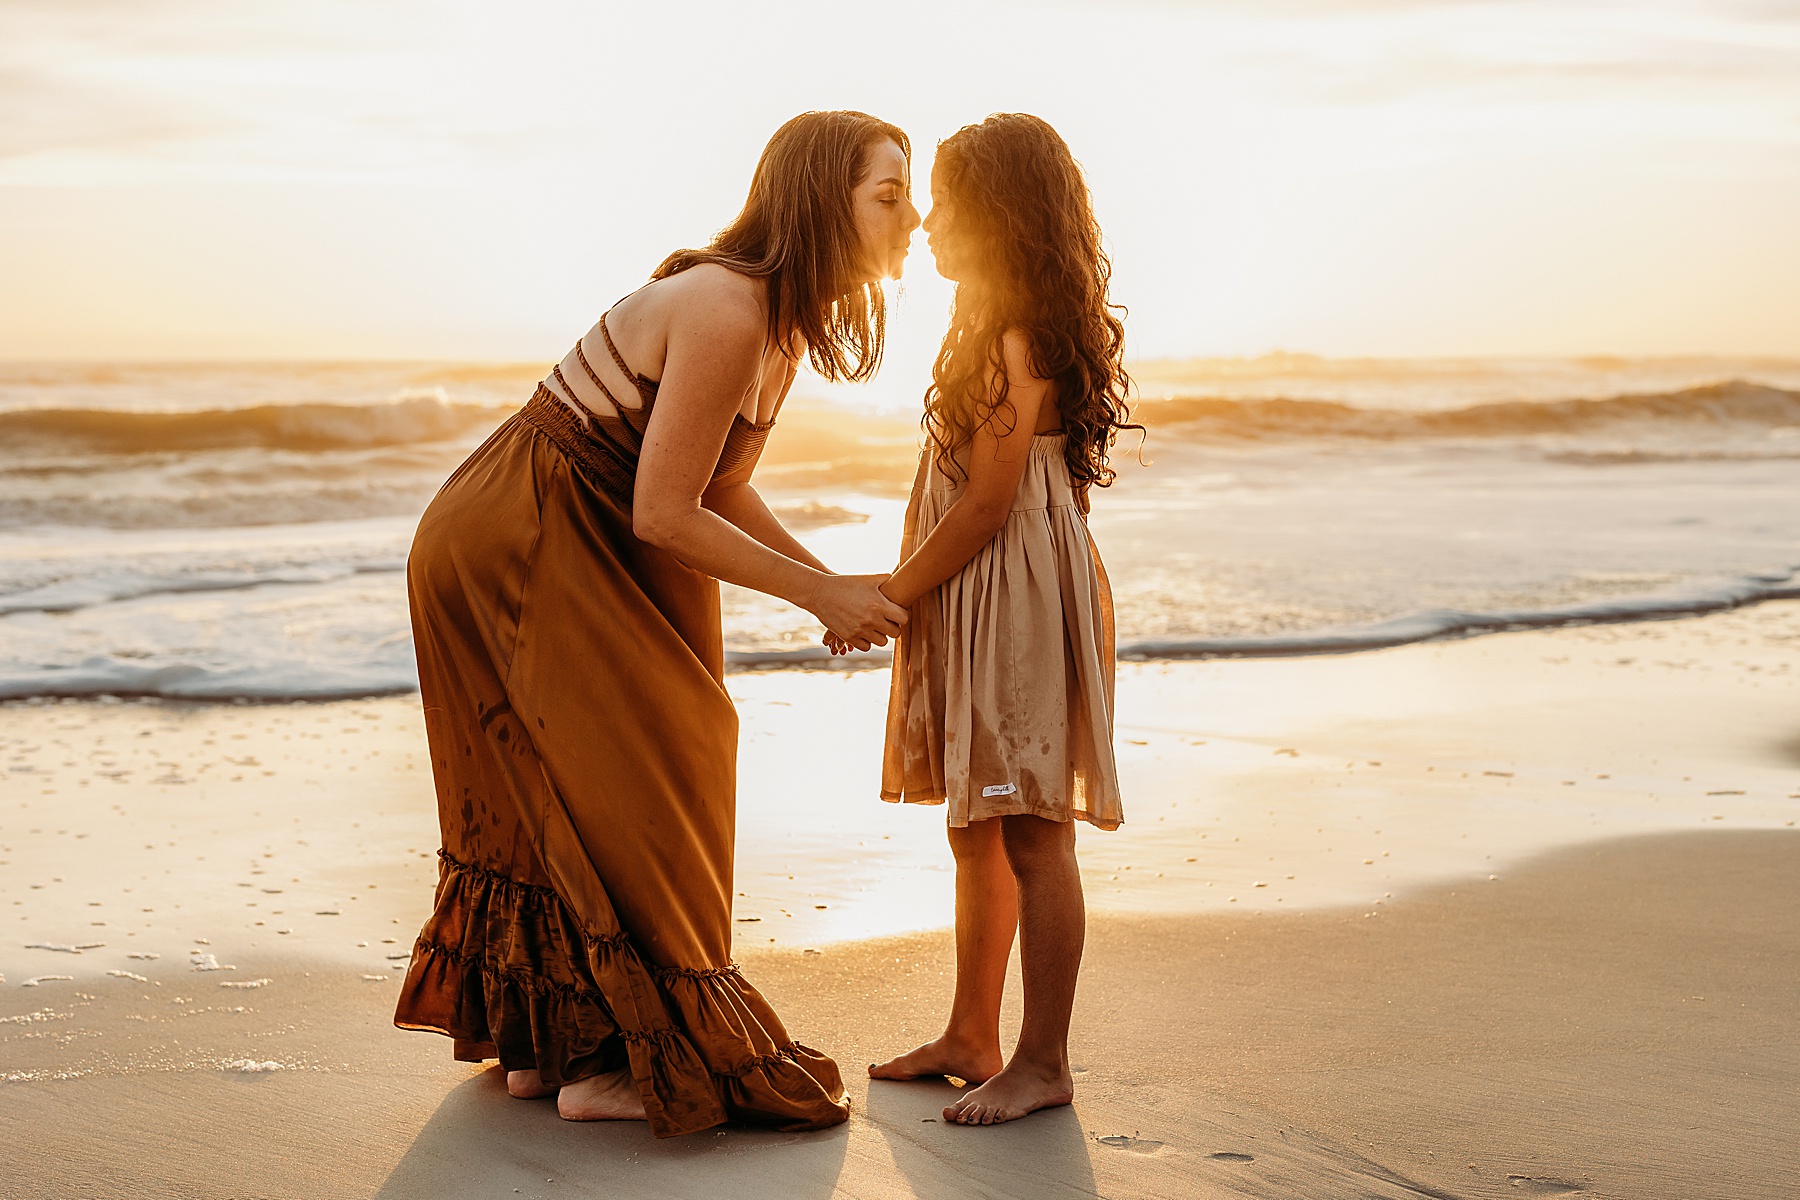 woman kissing little girl on the beach at sunrise wearing warm colors and backlit sunshine